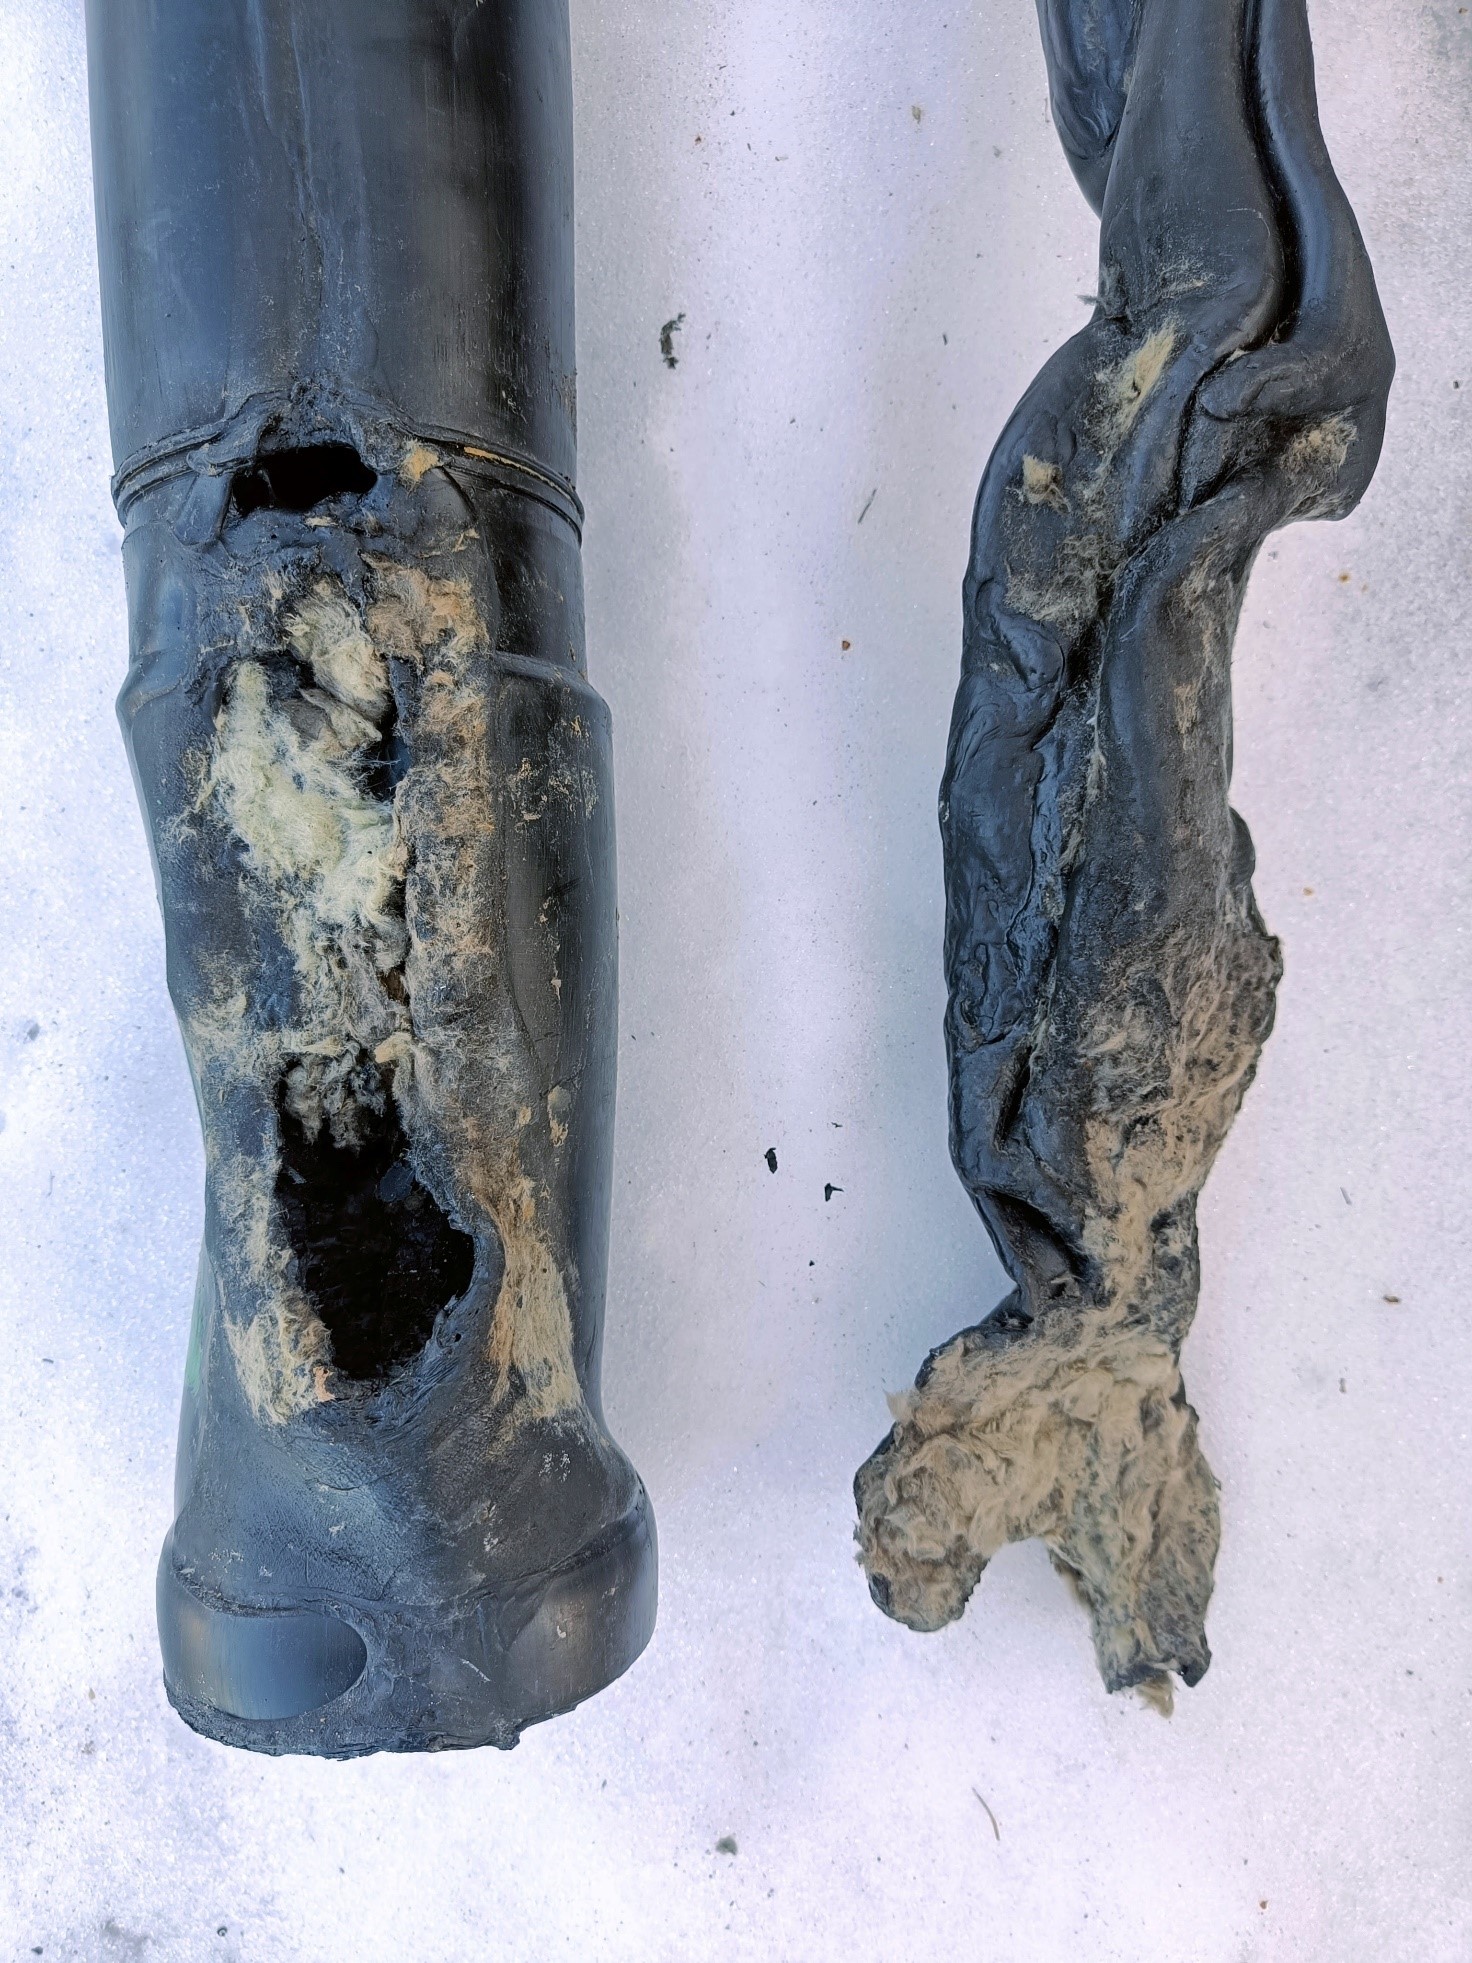 A melted black plastic sewer pipe.